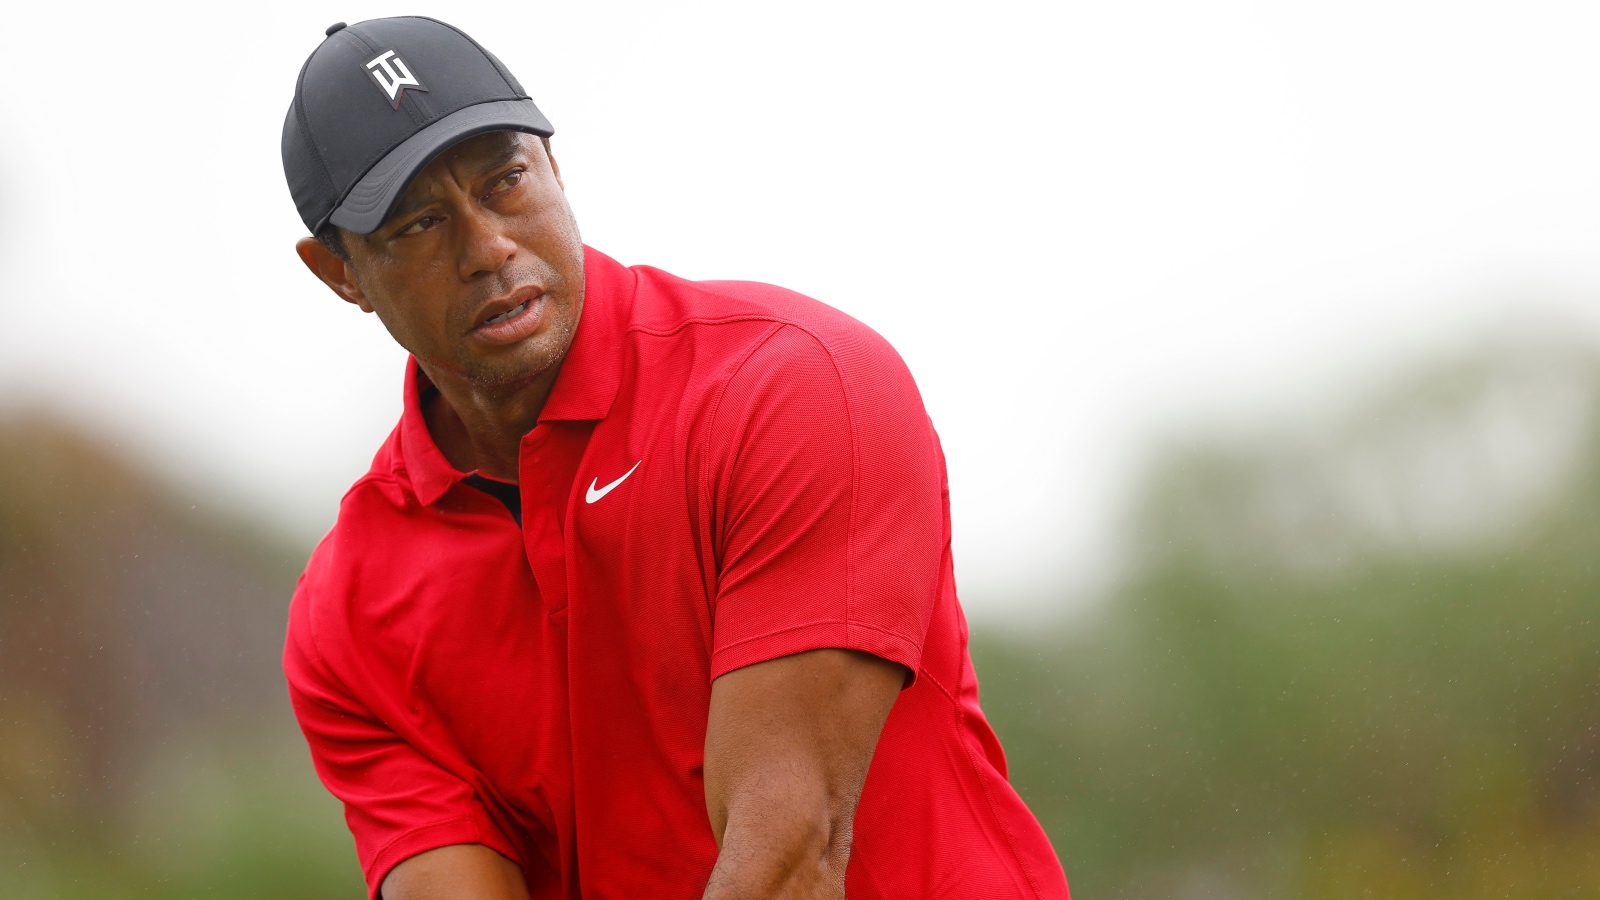 Tiger Woods wearing red and black on Sunday